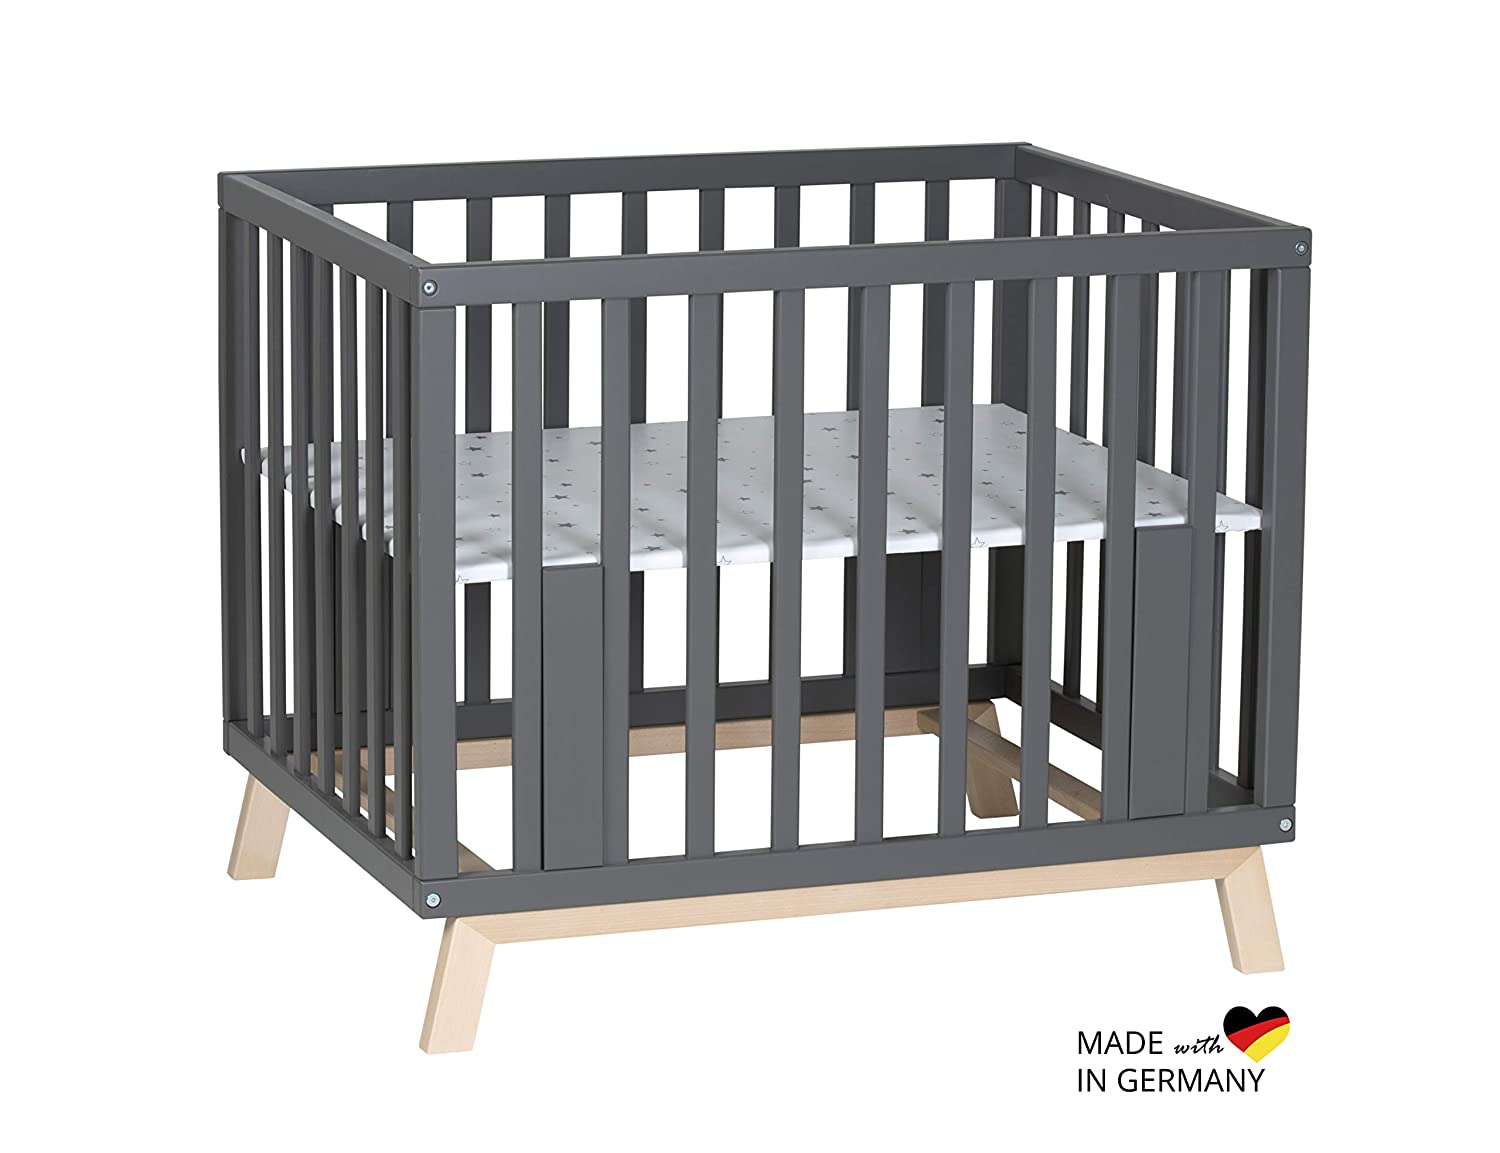 Schardt 02 050 00 88 077 Playpen Holly Anthracite / Natural Solid Beech Wood with Grey Stars Foil, Made in Germany, White